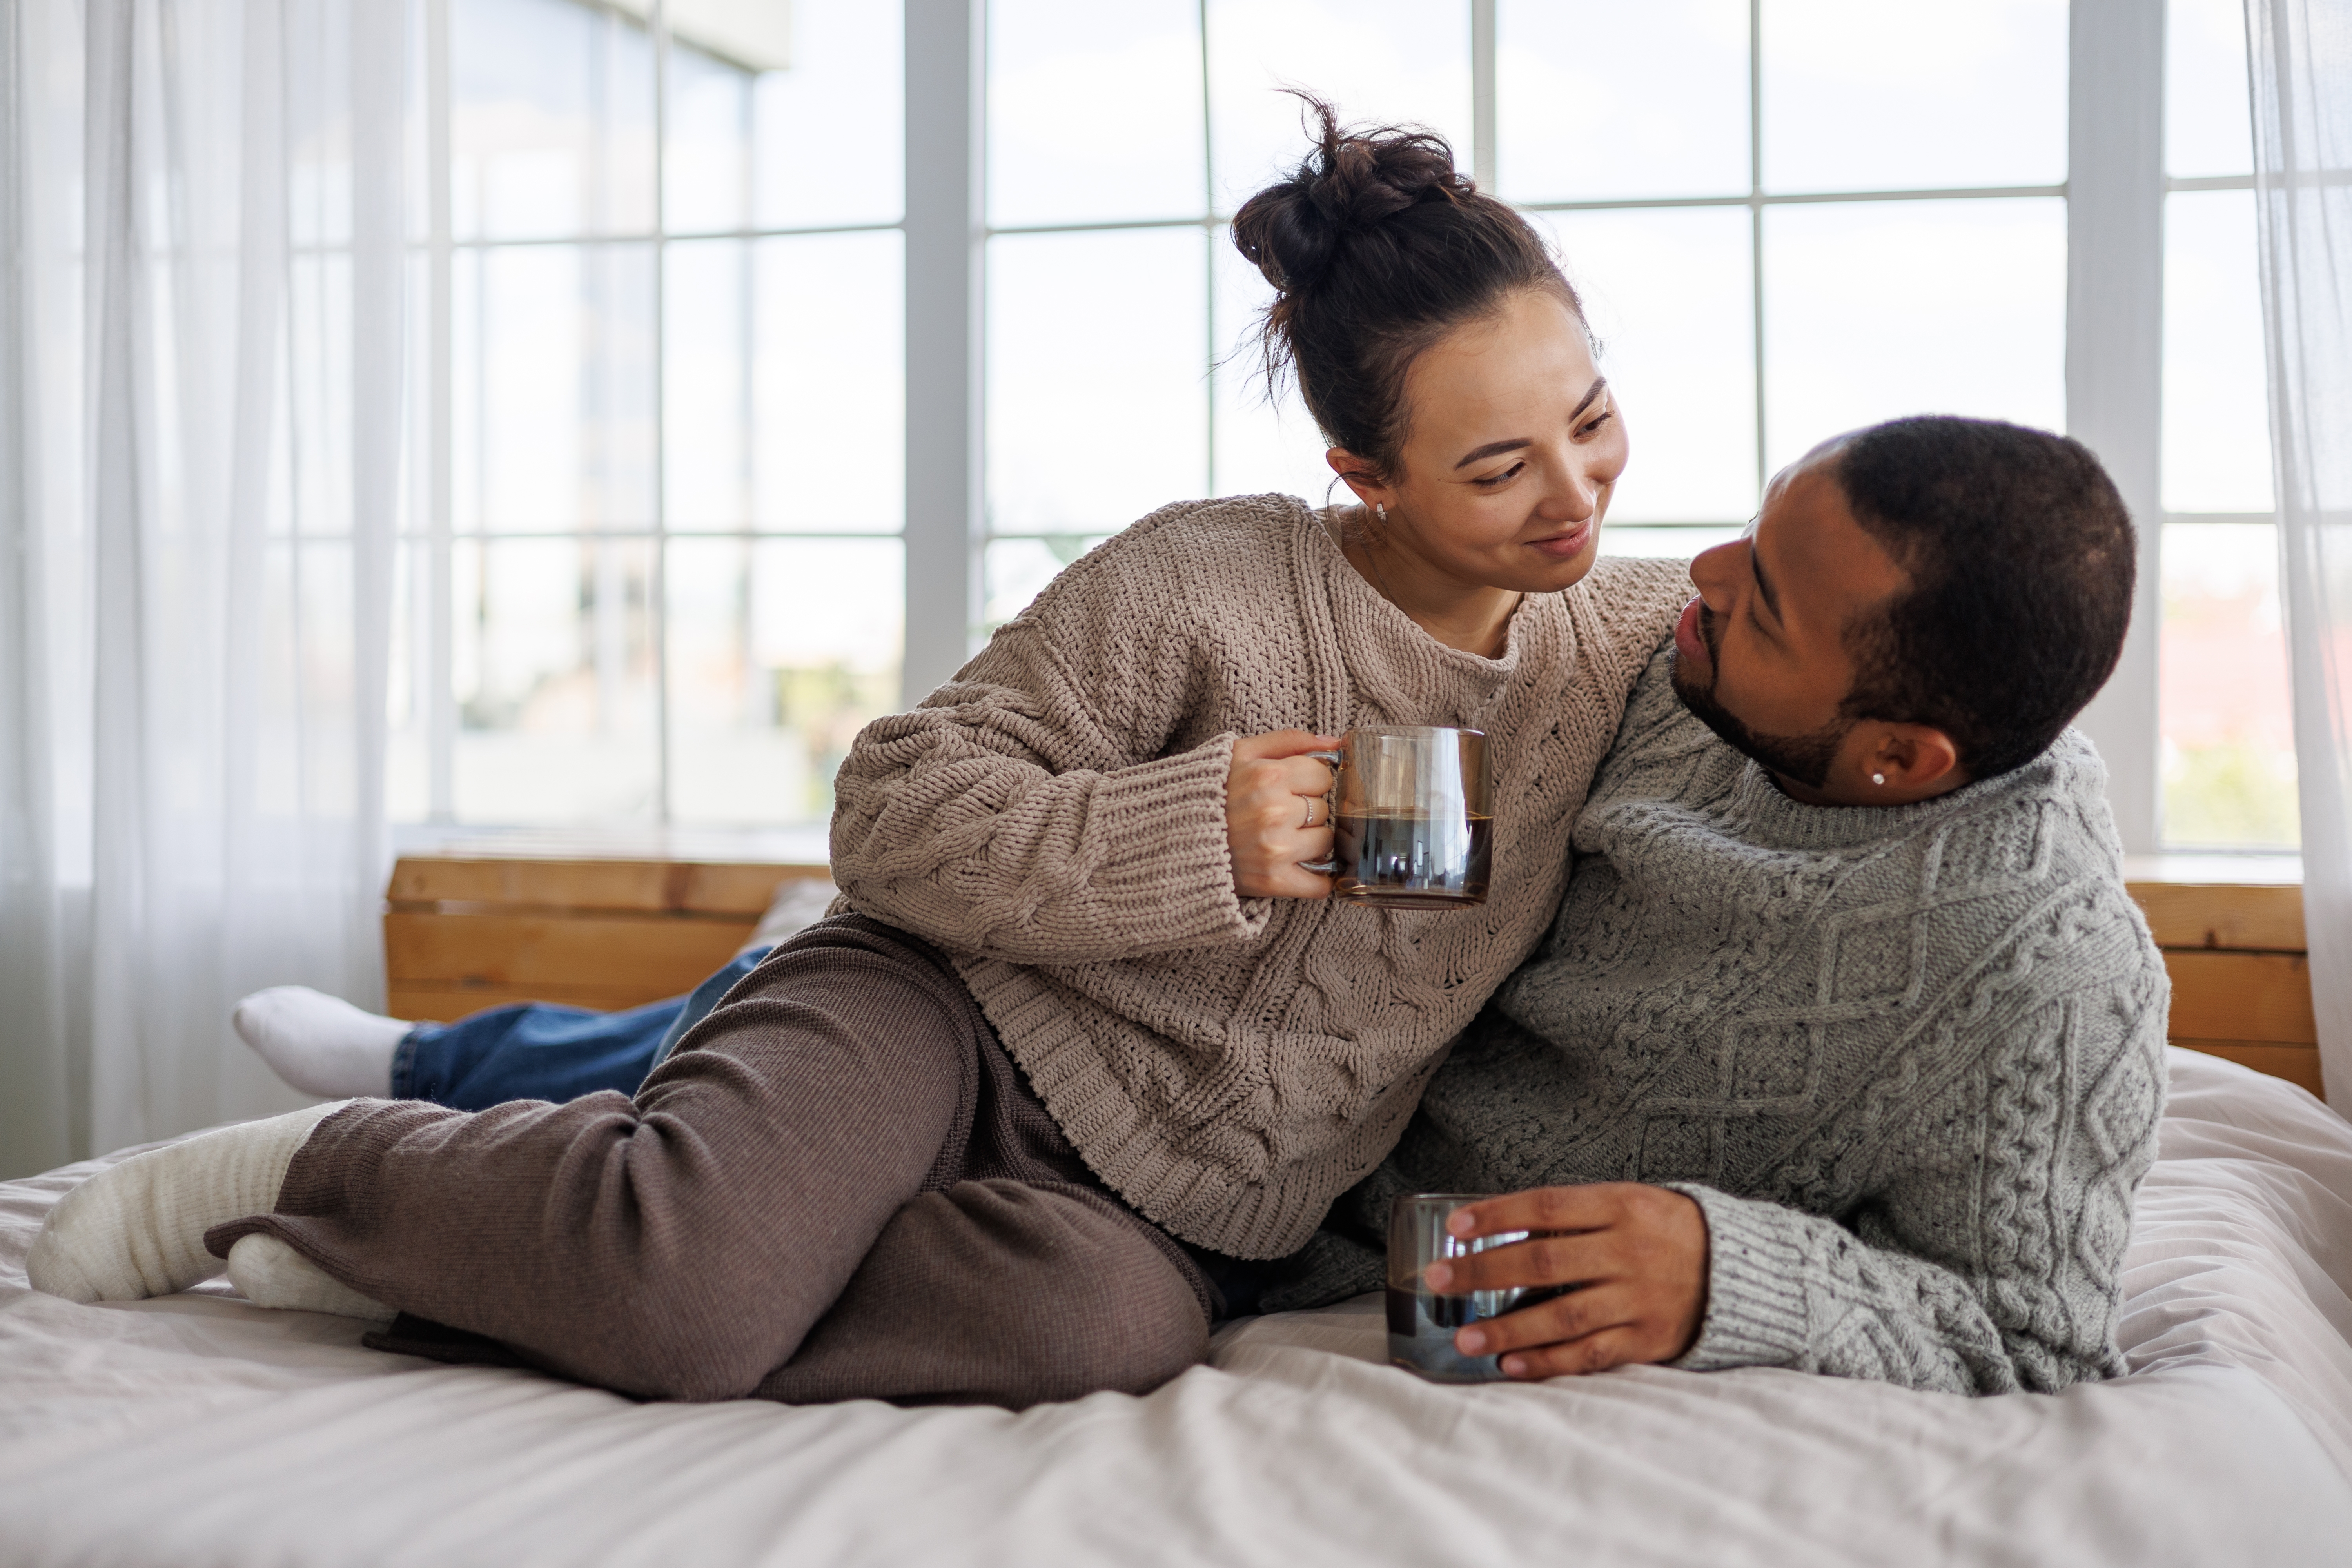 A happy couple looking cozy on a bed | Source: Shutterstock